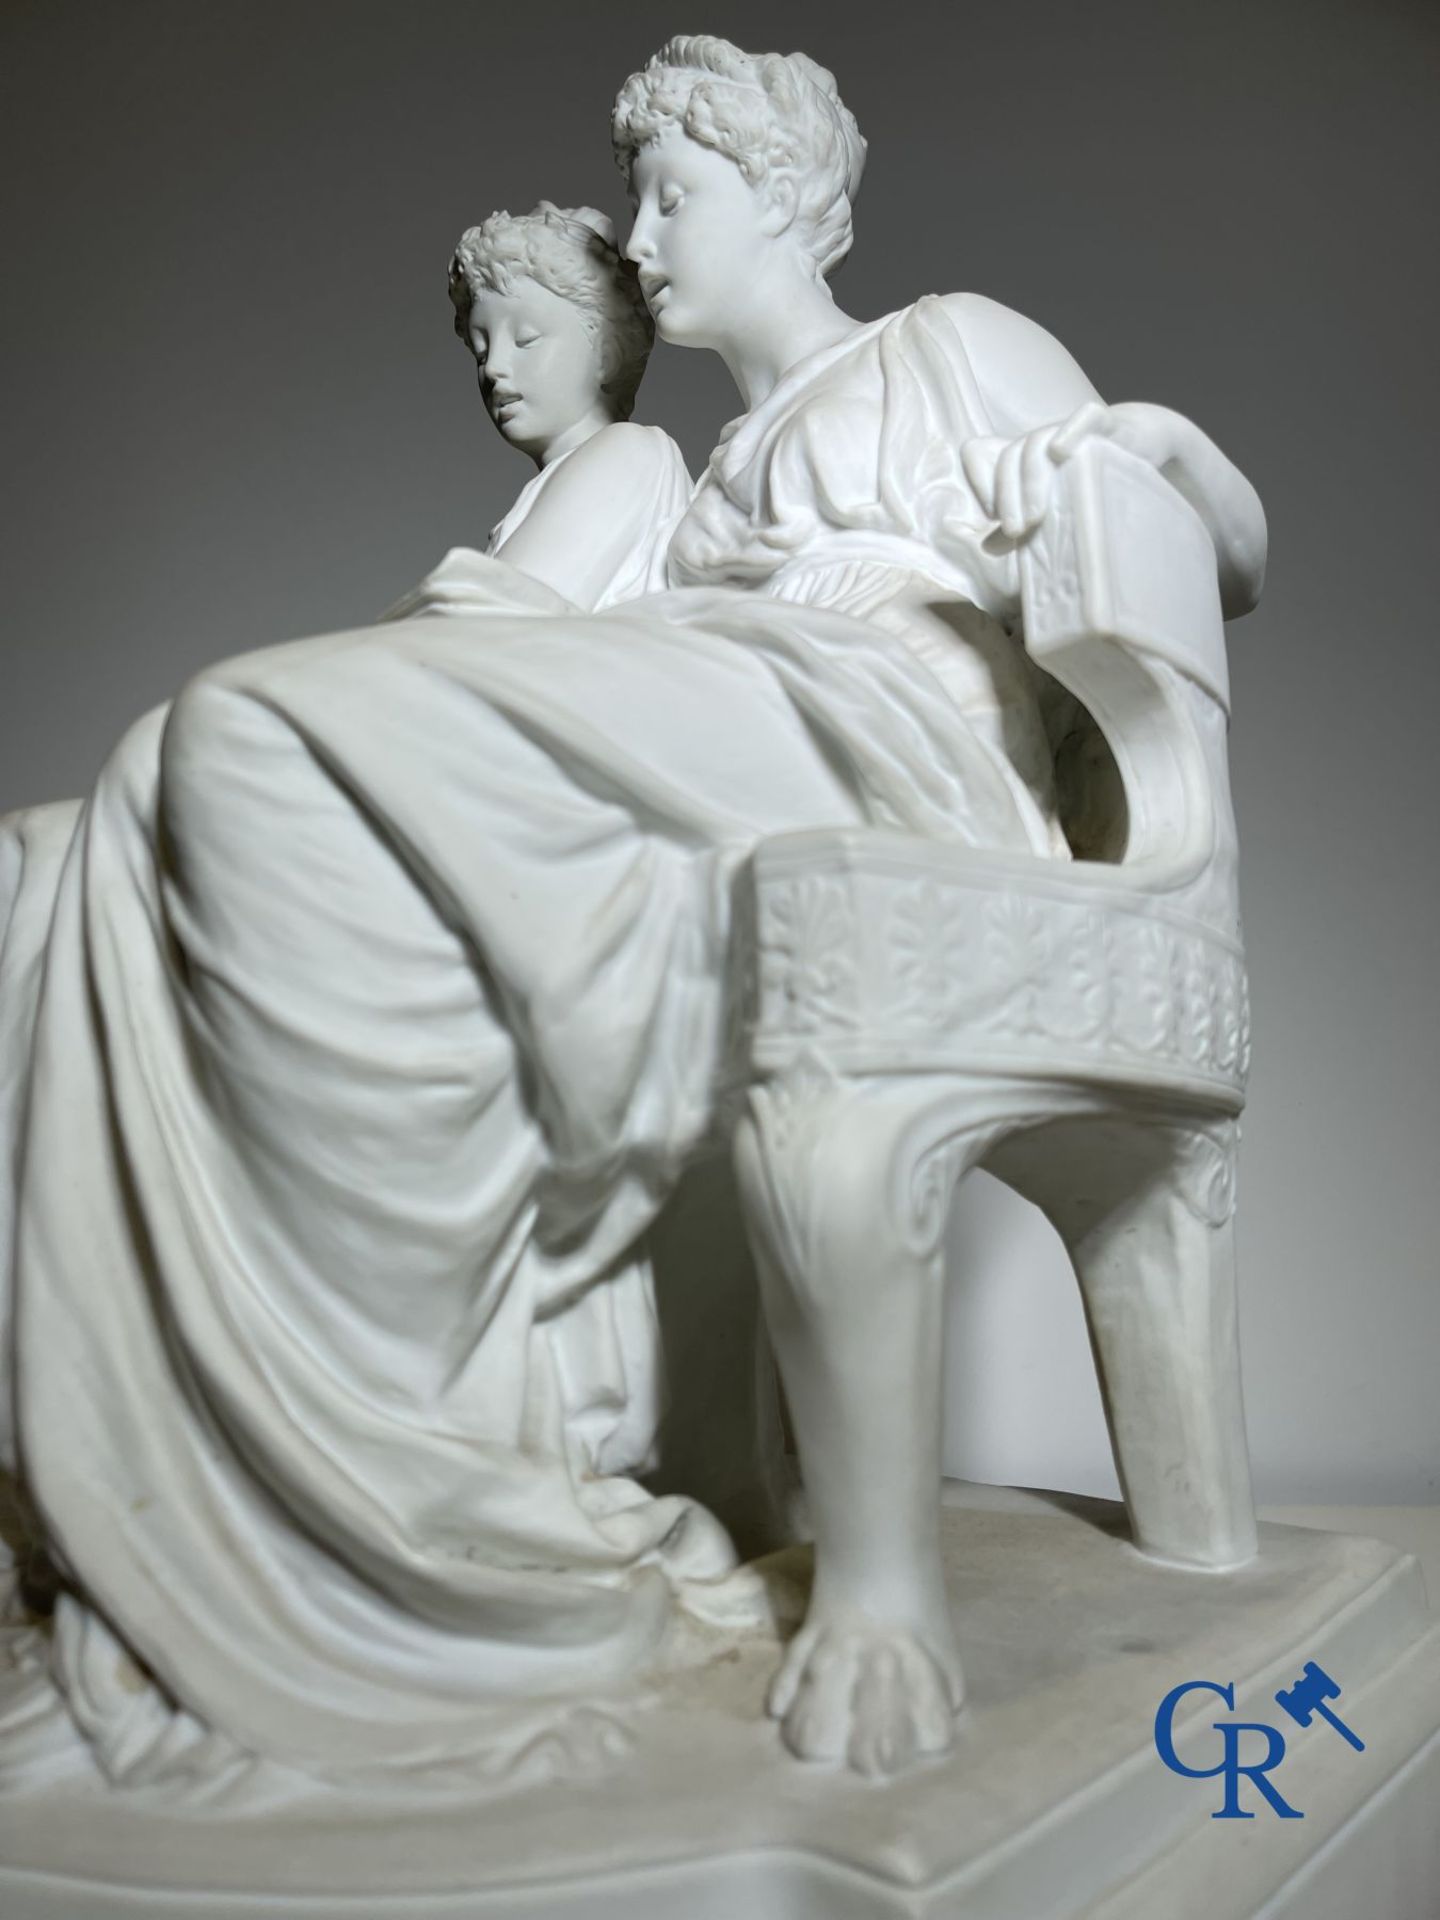 Edouard Lantéri  (1848-1917)  "Duo" Imposing statue in white biscuit in Neoclassical style on a matc - Image 16 of 16